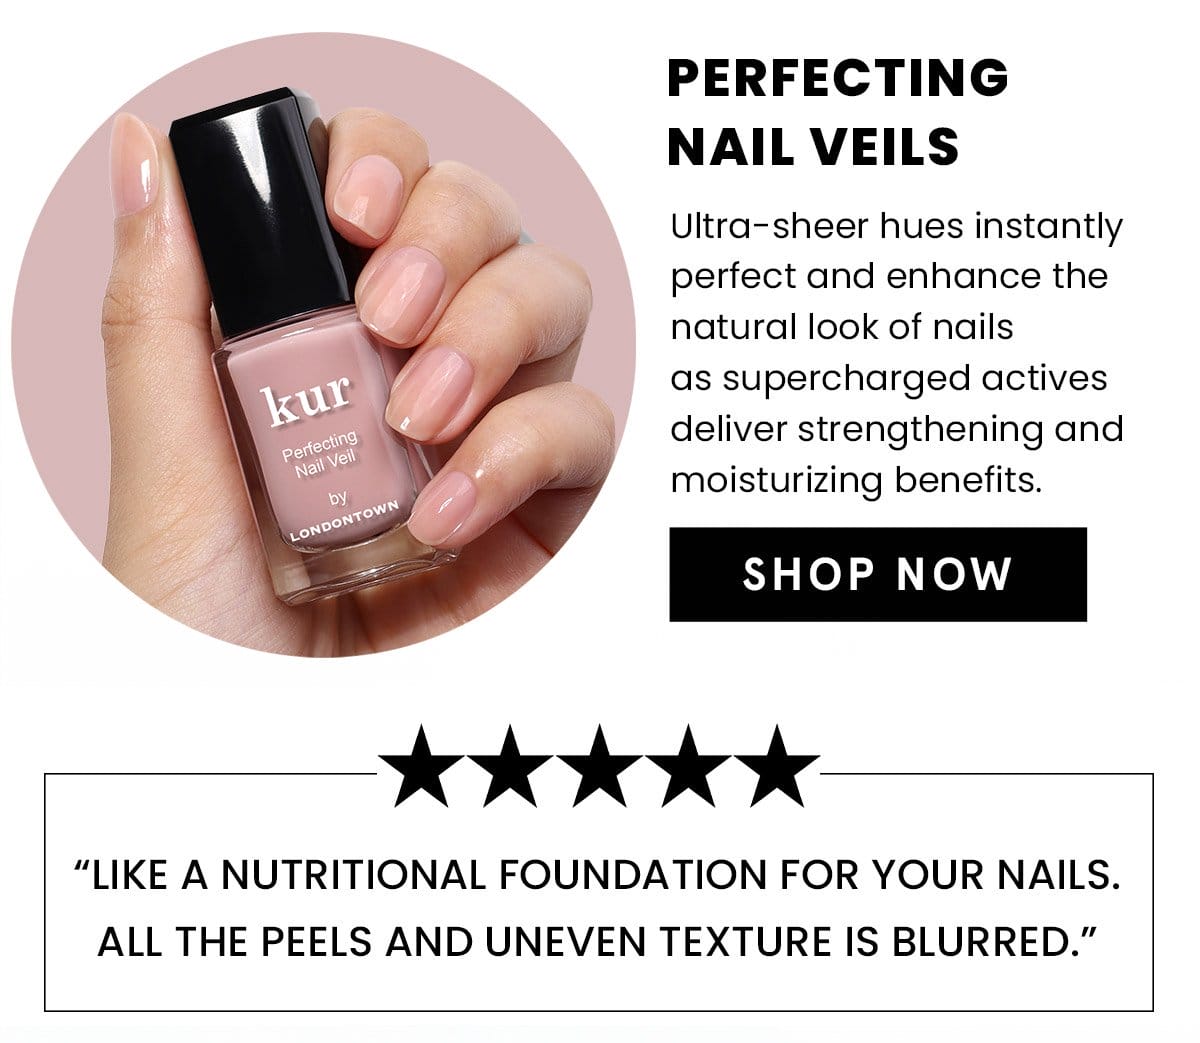 Perfecting Nail Veils | Shop Now